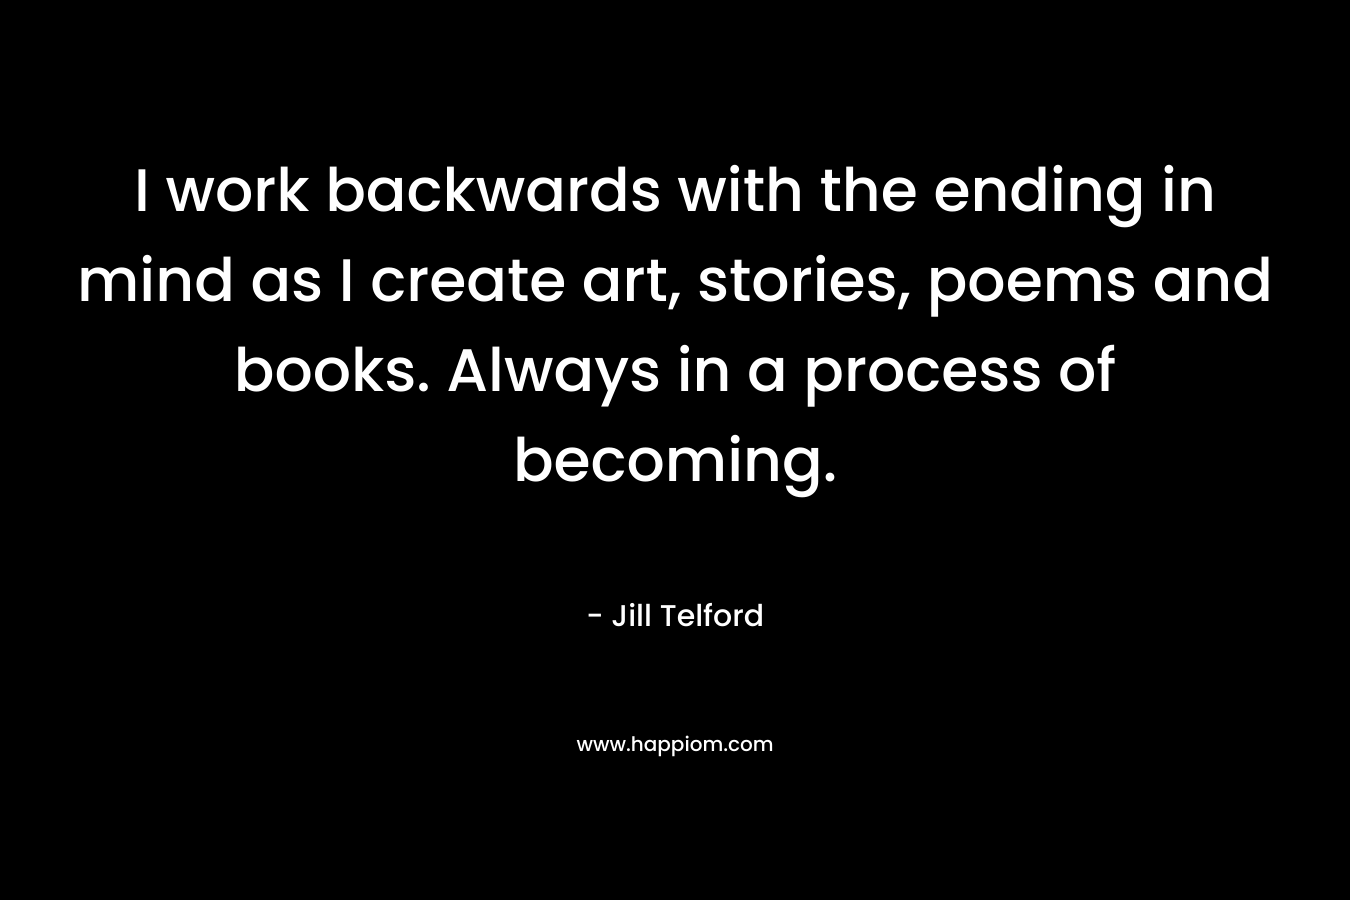 I work backwards with the ending in mind as I create art, stories, poems and books. Always in a process of becoming.